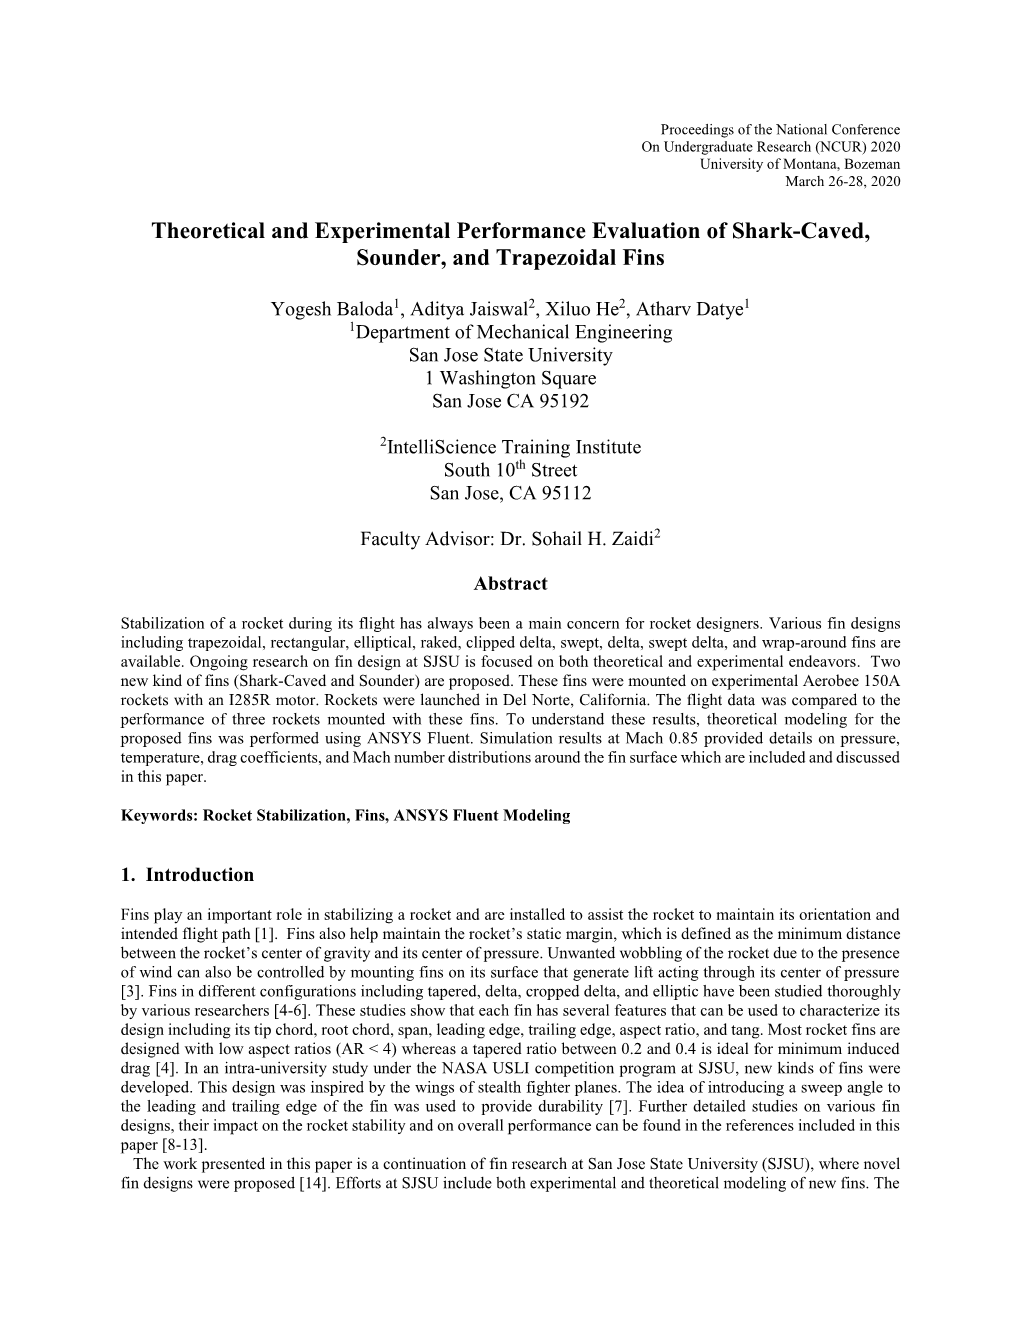 Theoretical and Experimental Performance Evaluation of Shark-Caved, Sounder, and Trapezoidal Fins